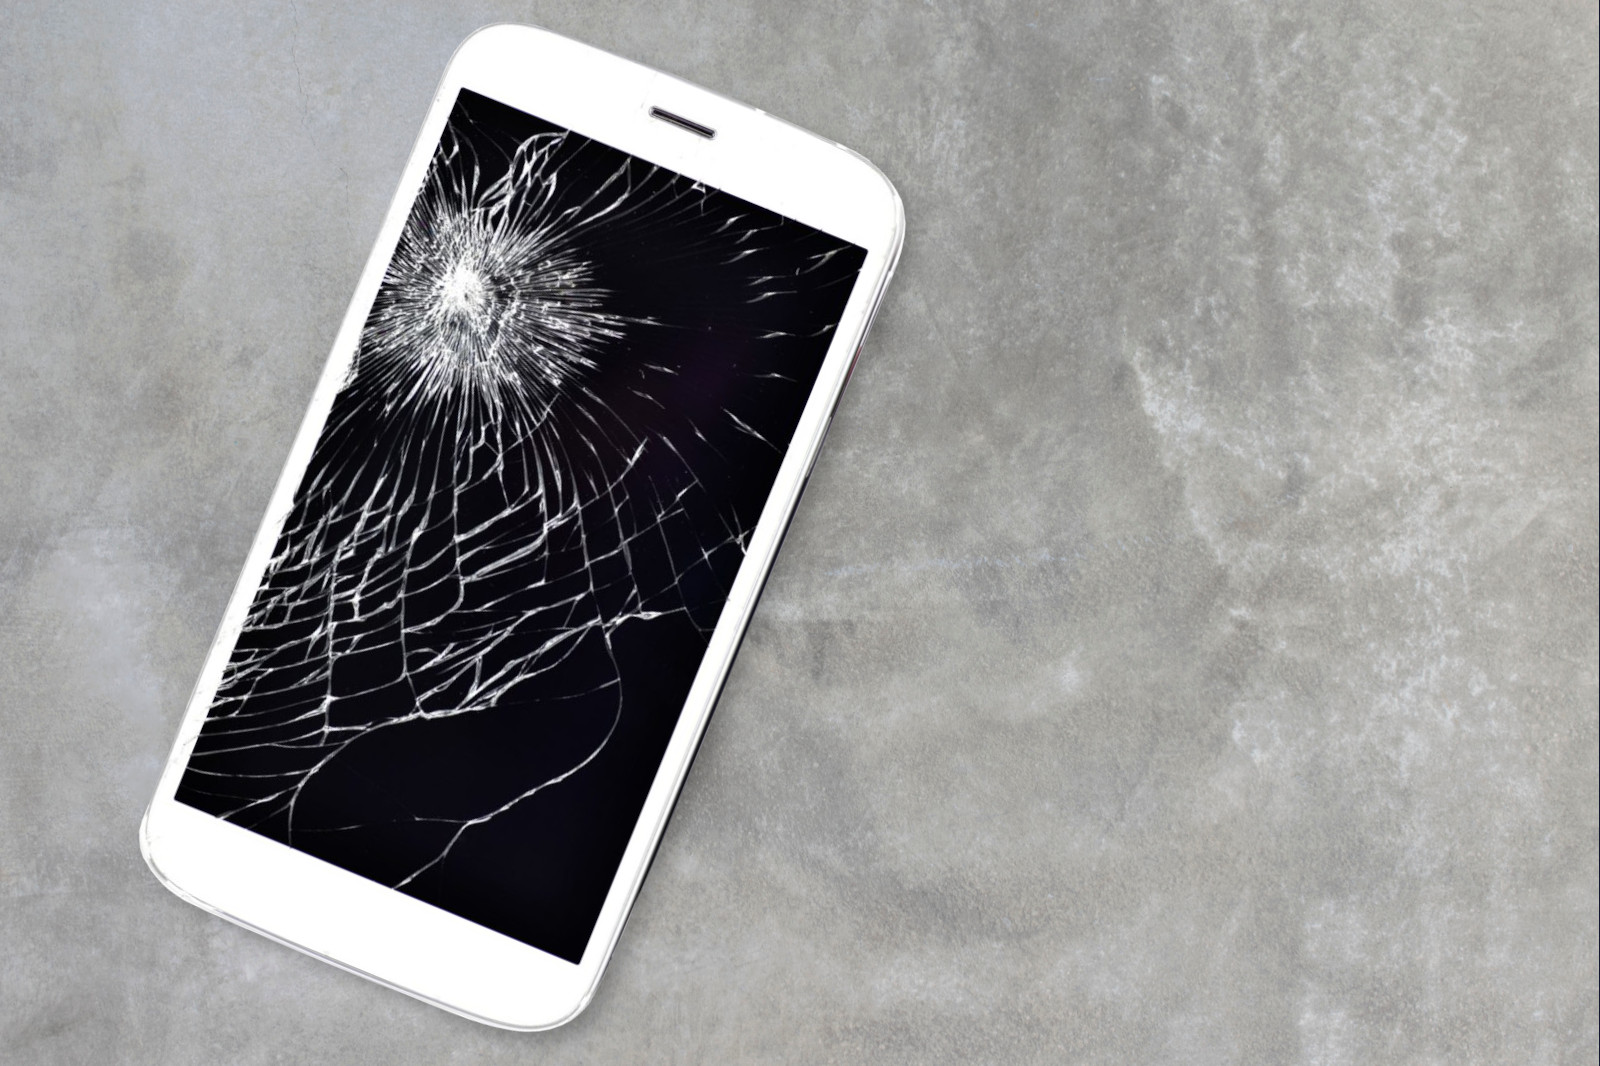 See How Fixing The Broken Screen On Your Phone May Be Easier Than You Think